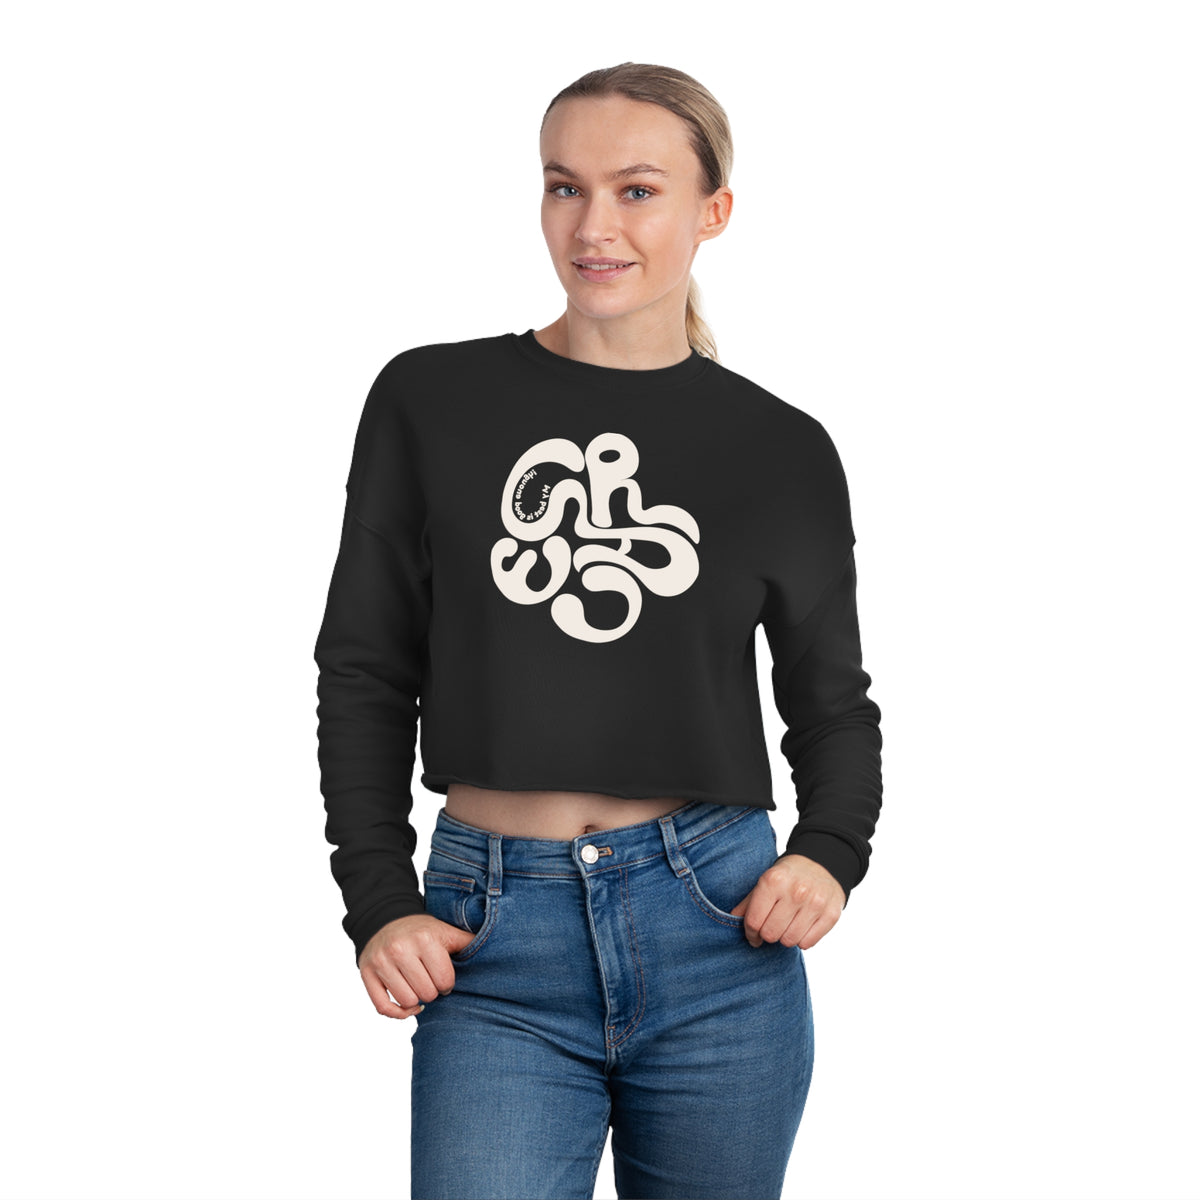 Grace, My Best is Good Enough! Cropped Sweatshirts